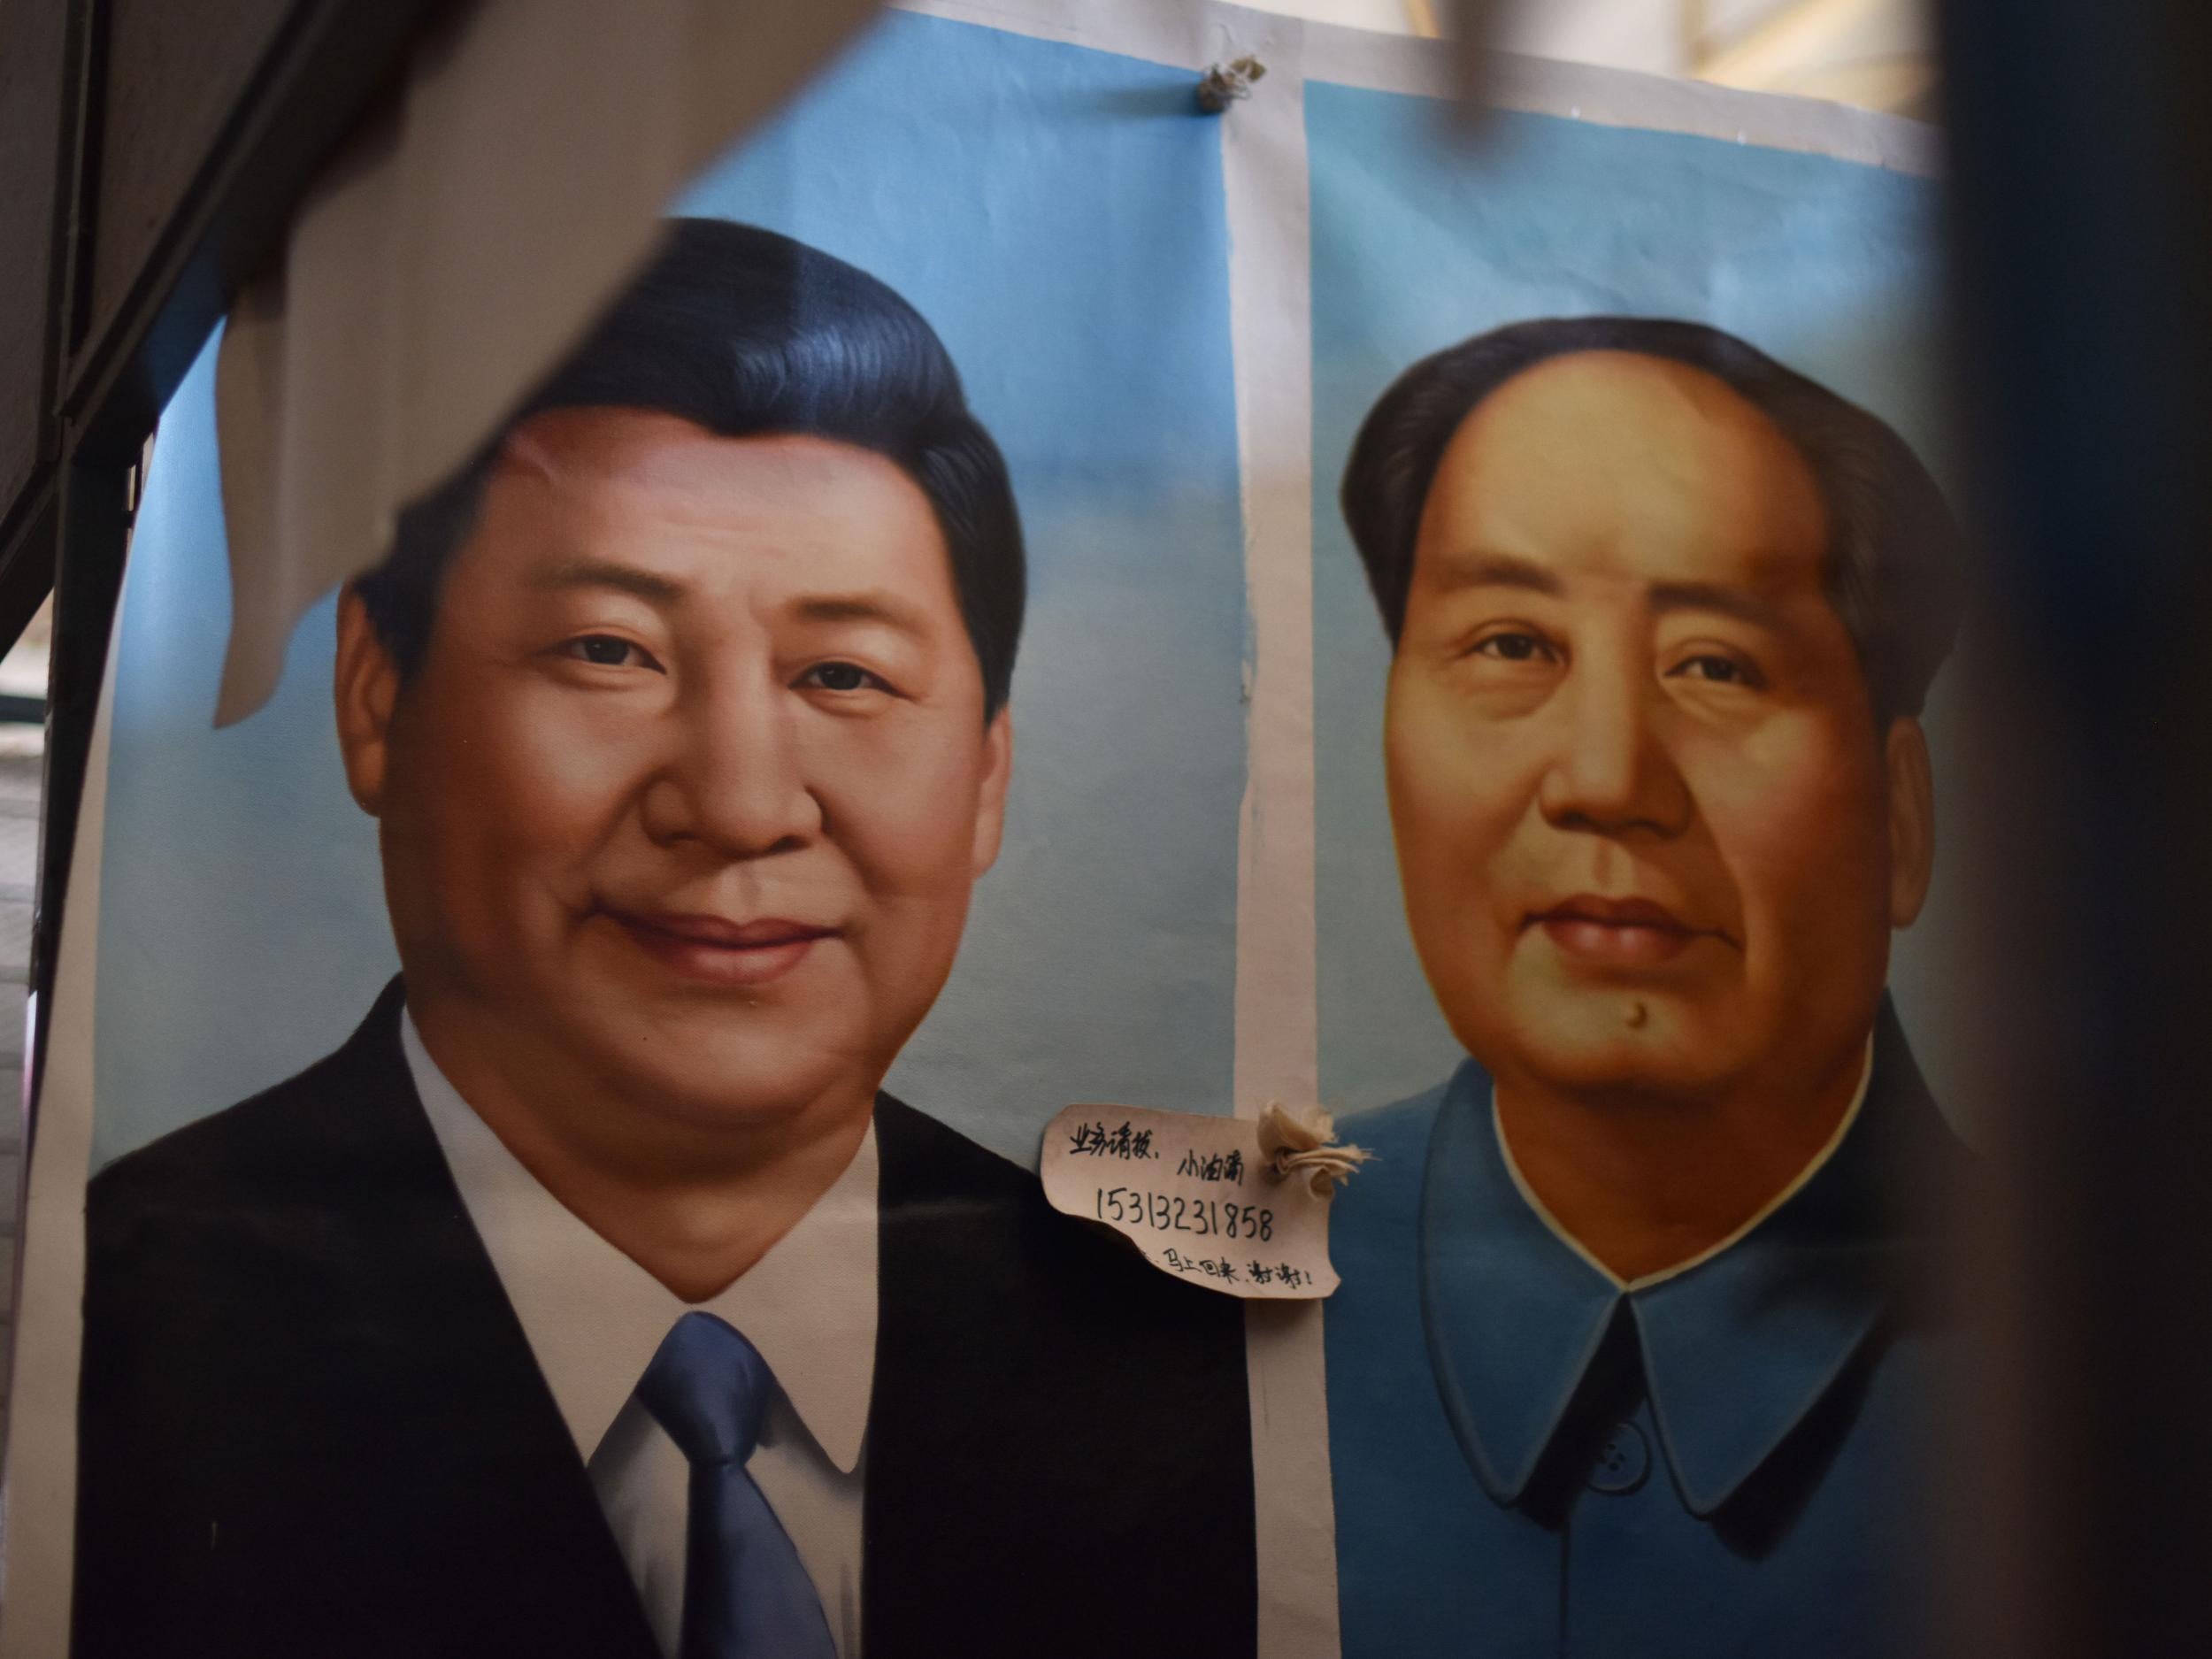 In a Beijing marketplace, a portrait of Xi hangs next to Mao's